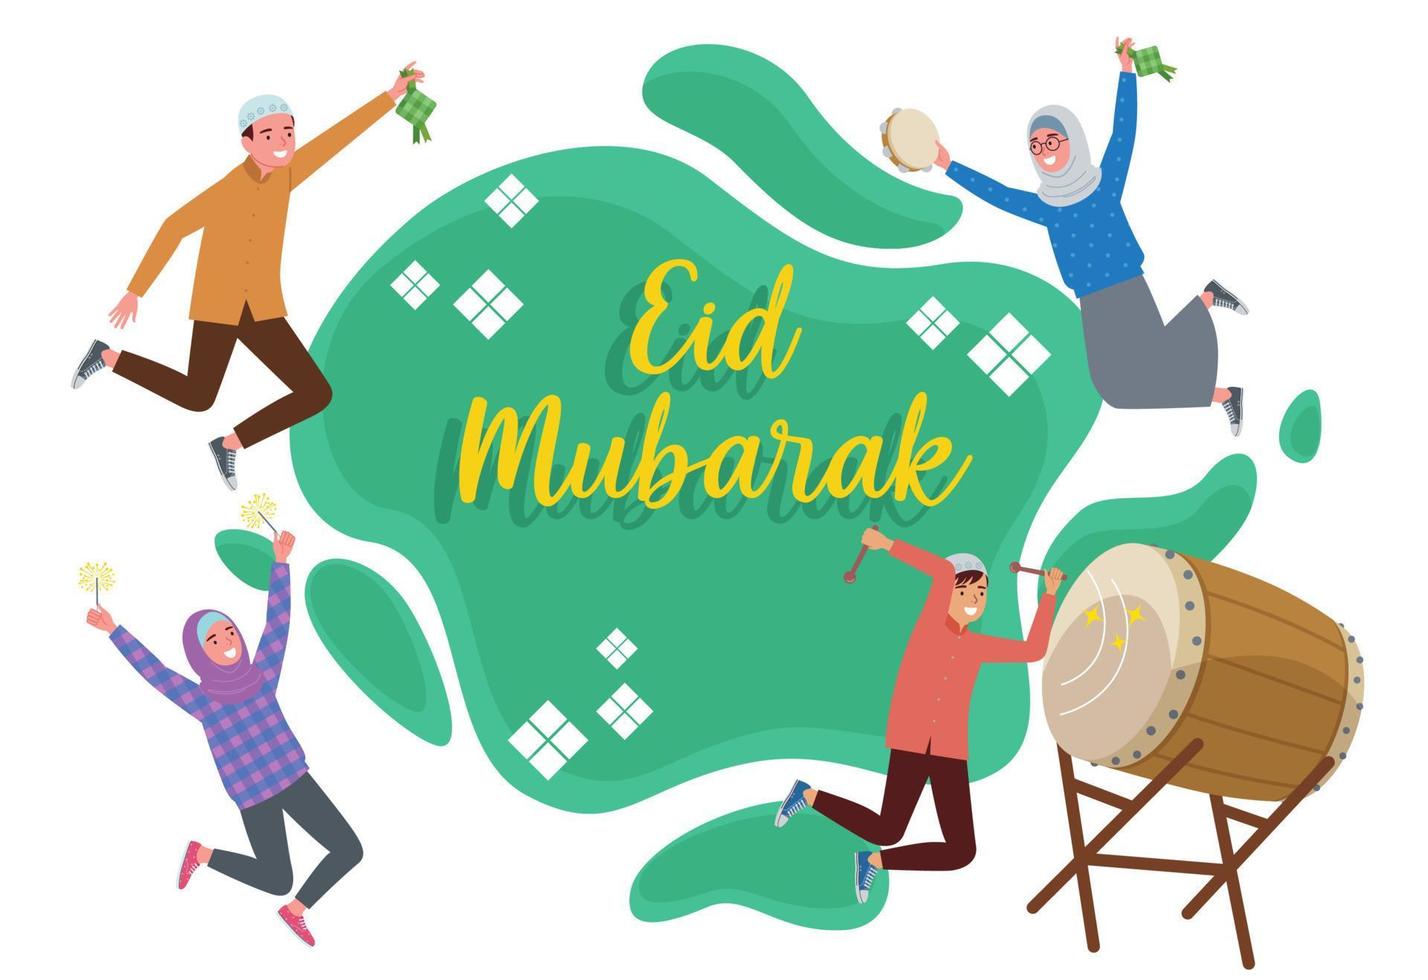 a group of Muslim teenagers who do various kinds of poses like beating drum or Bedug, holding a fireworks, holding a tambourine, and holding Ketupat. They wear colorful clothes and say Eid Mubarak. vector